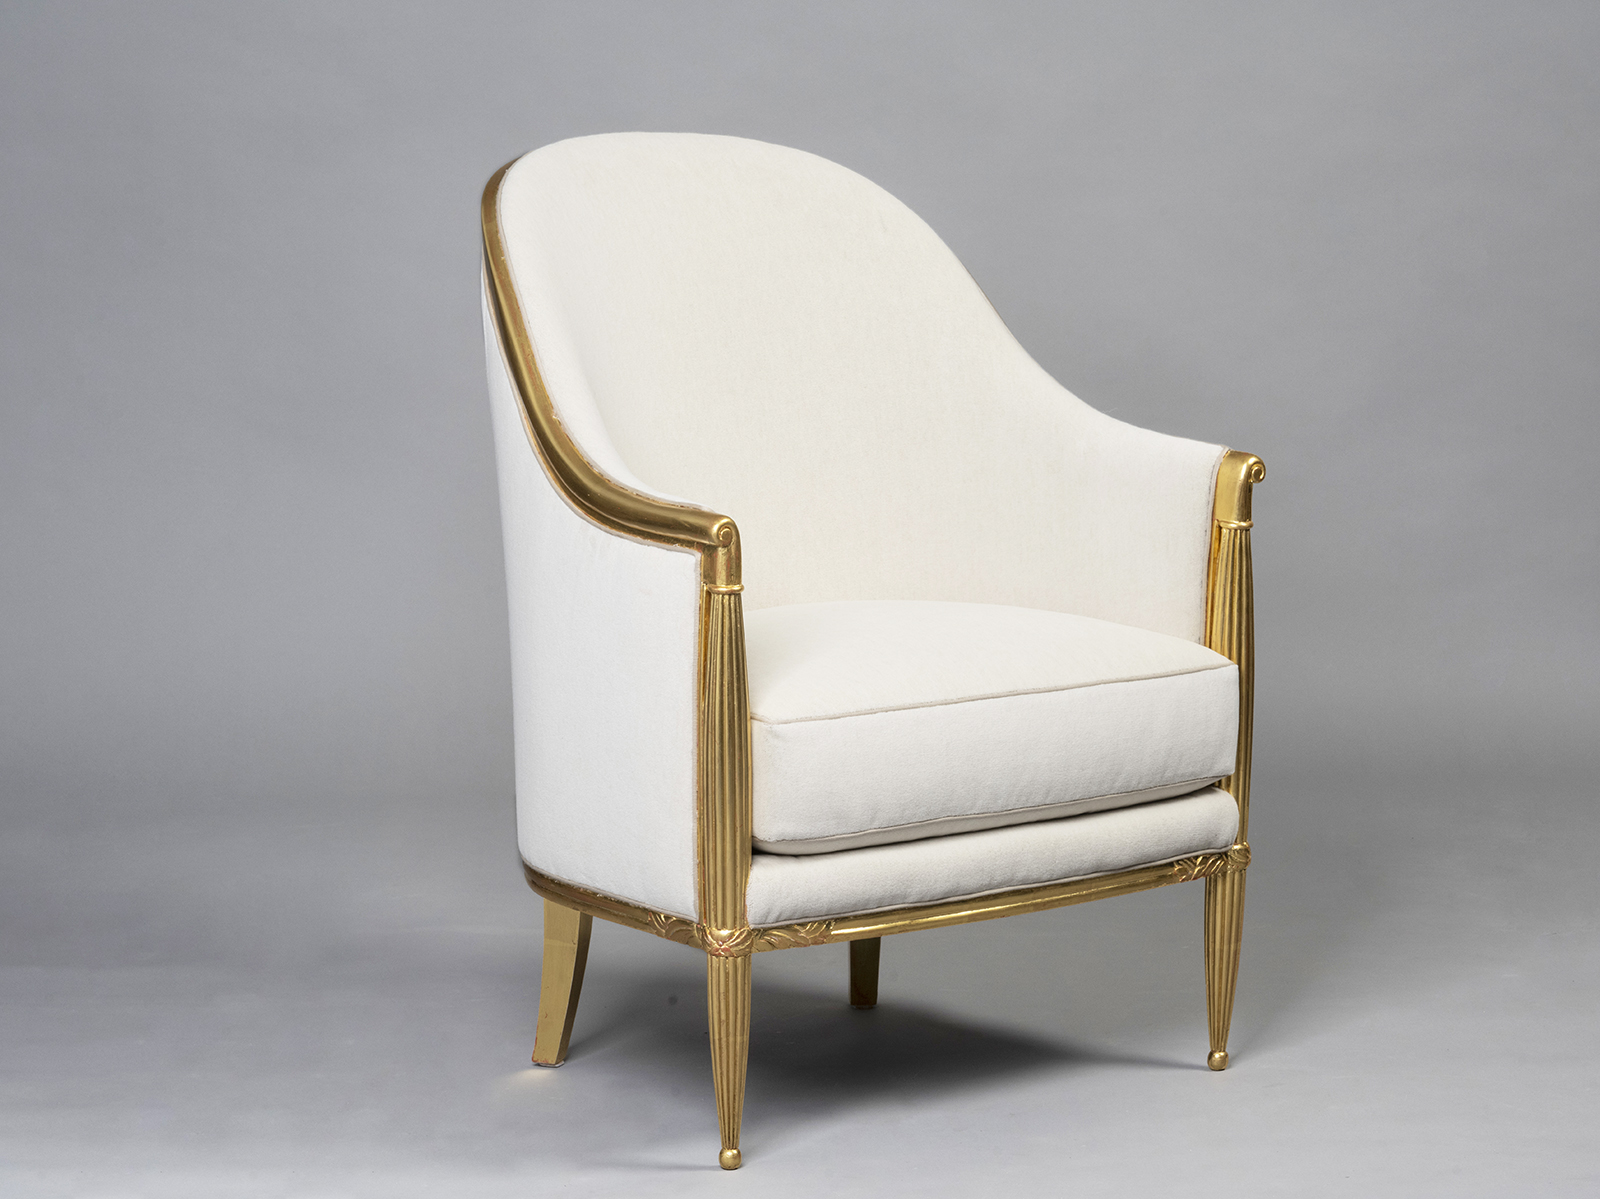 A French 30’s Inspired Bergere by ILIAD Design